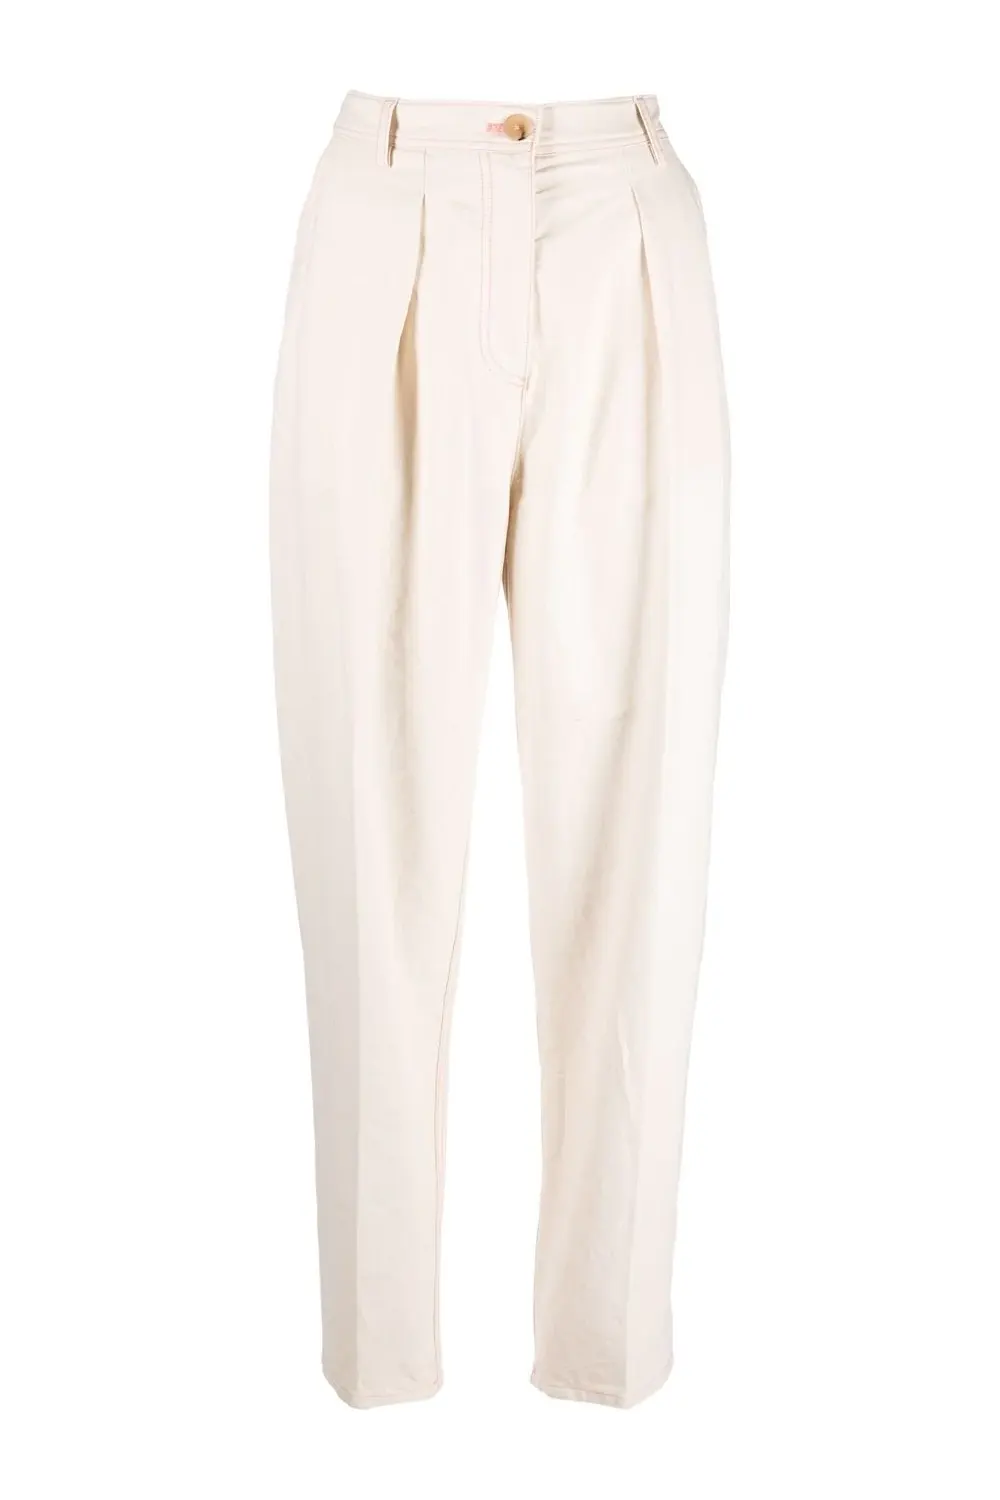 High-waisted pleat-front trousers, ecru